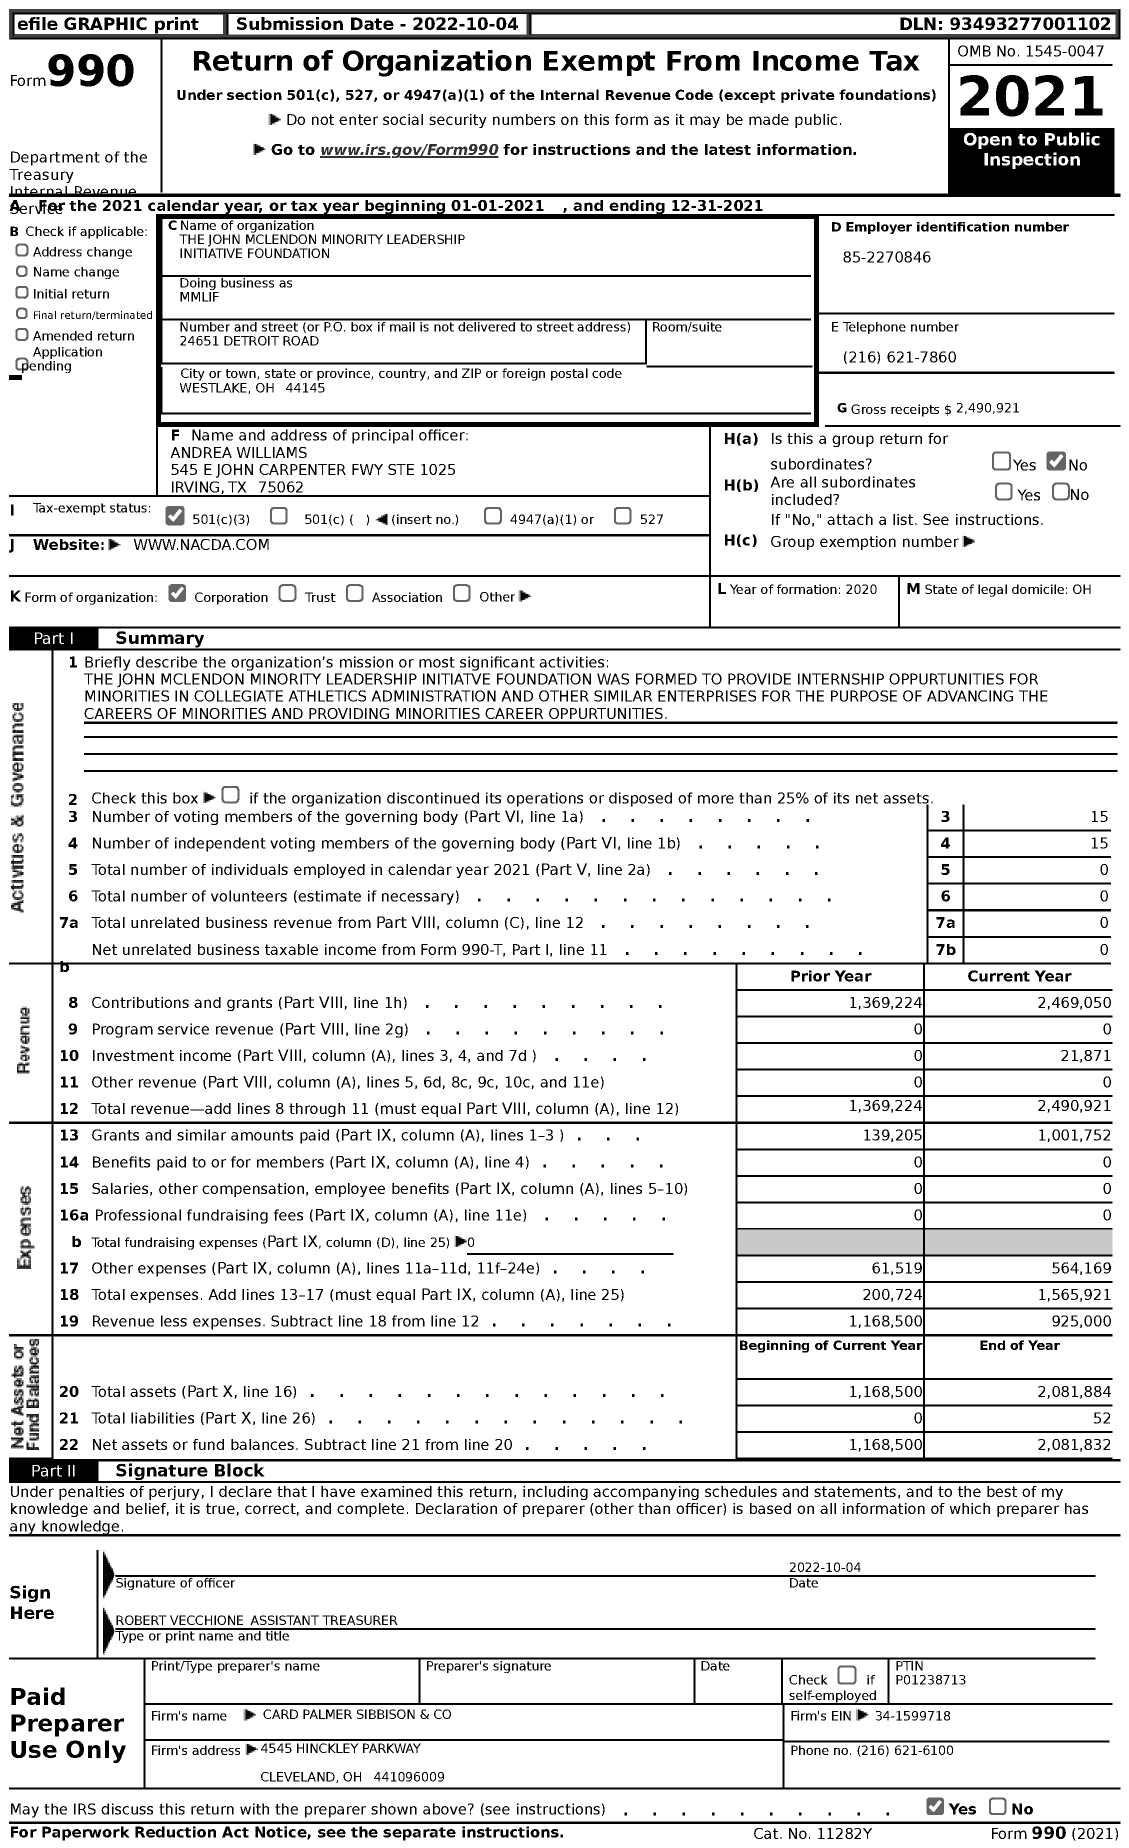 Image of first page of 2021 Form 990 for The John Mclendon Minority Leadership Initiative Foundation (MMLIF)